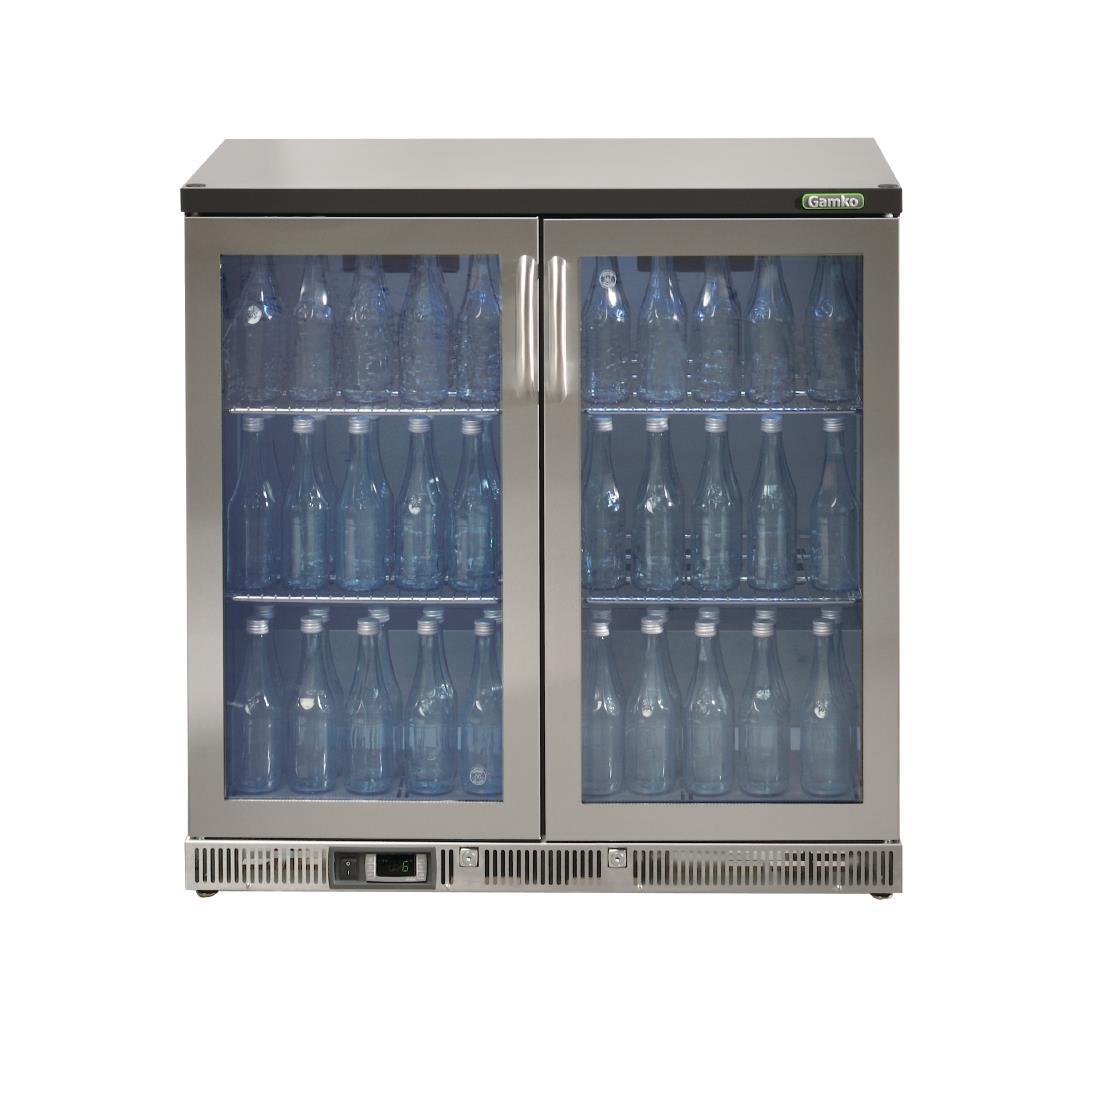 Gamko Bottle Cooler - Double Hinged Door 250 Ltr Stainless Steel - CE559  - 2